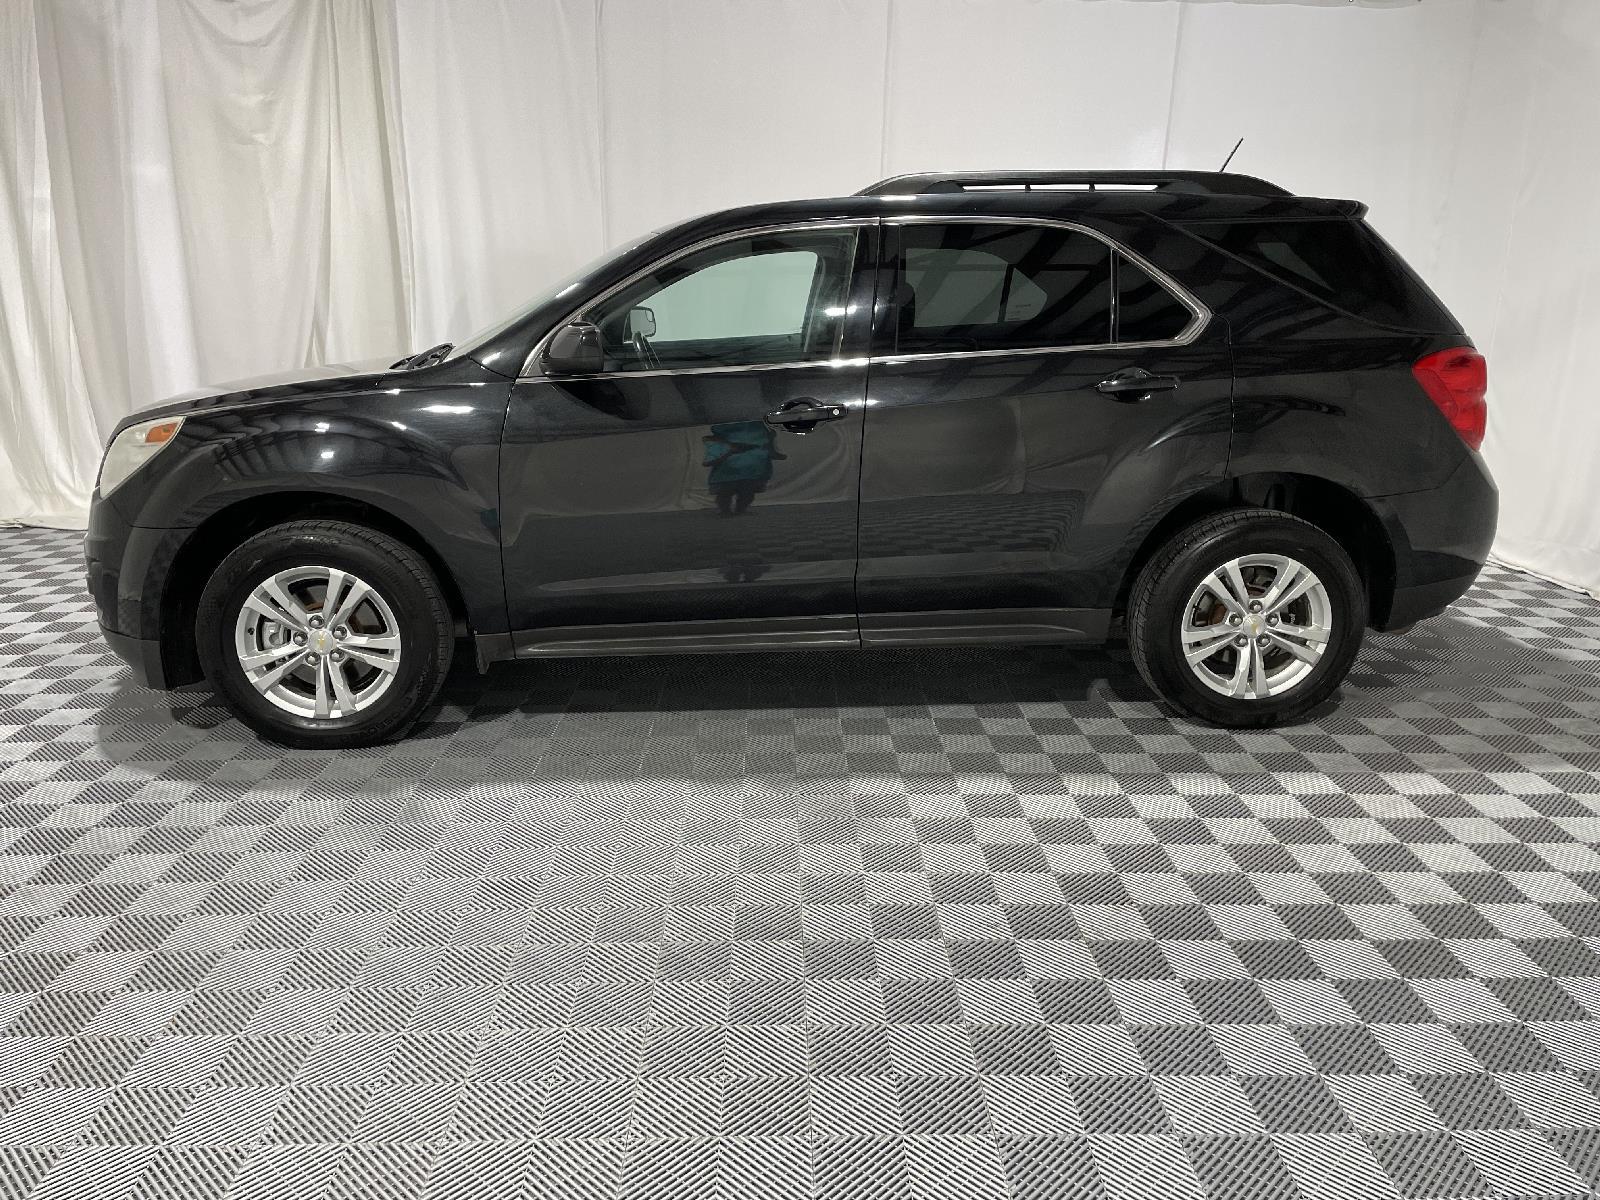 Used 2014 Chevrolet Equinox LT SUV for sale in St Joseph MO